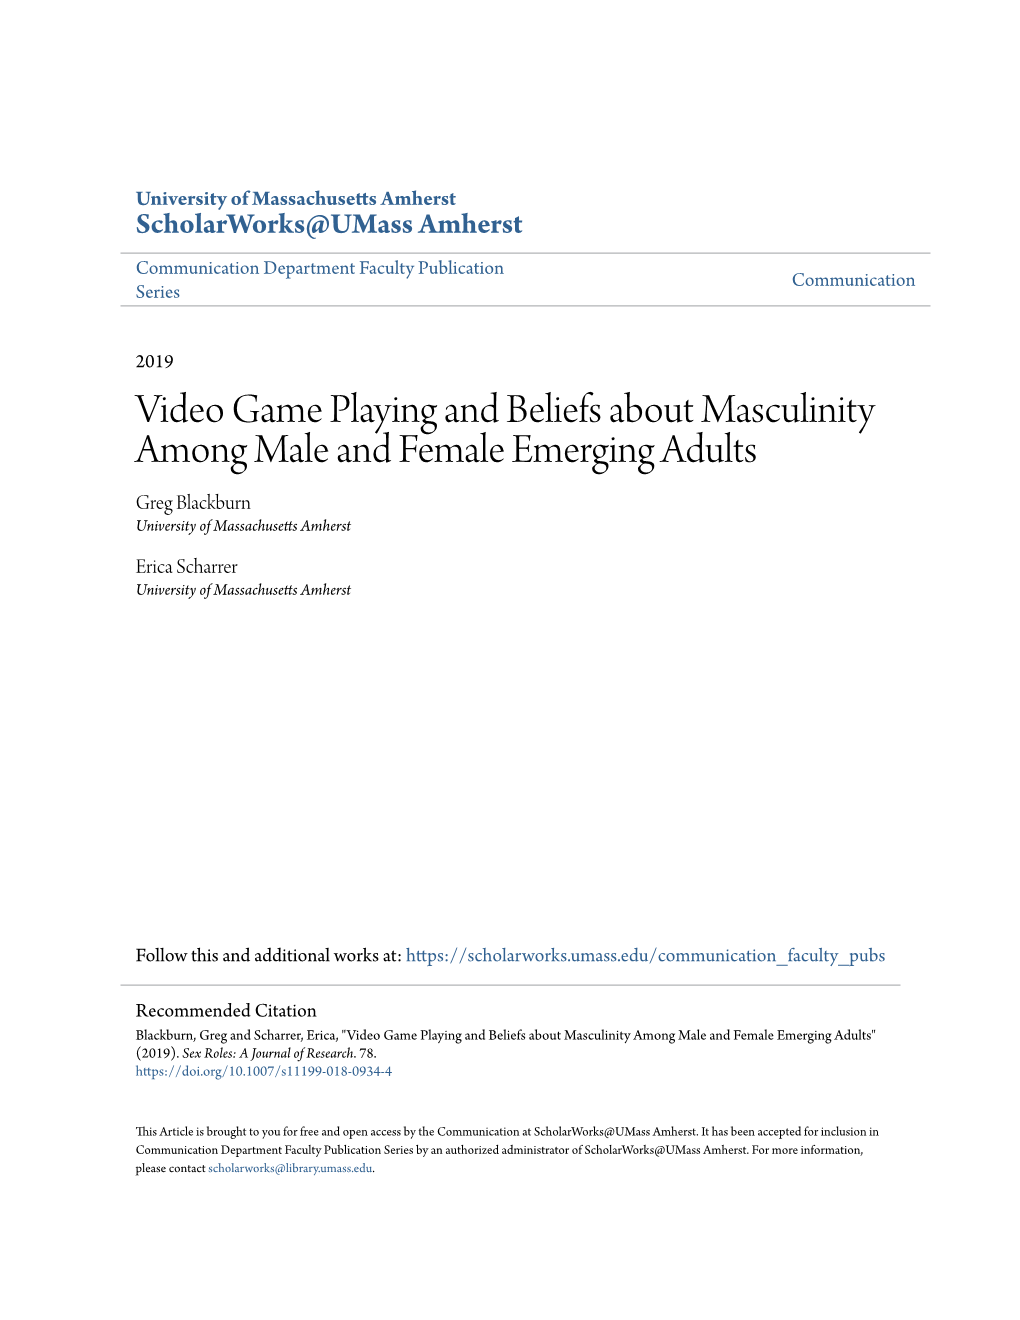 Video Game Playing and Beliefs About Masculinity Among Male and Female Emerging Adults Greg Blackburn University of Massachusetts Amherst